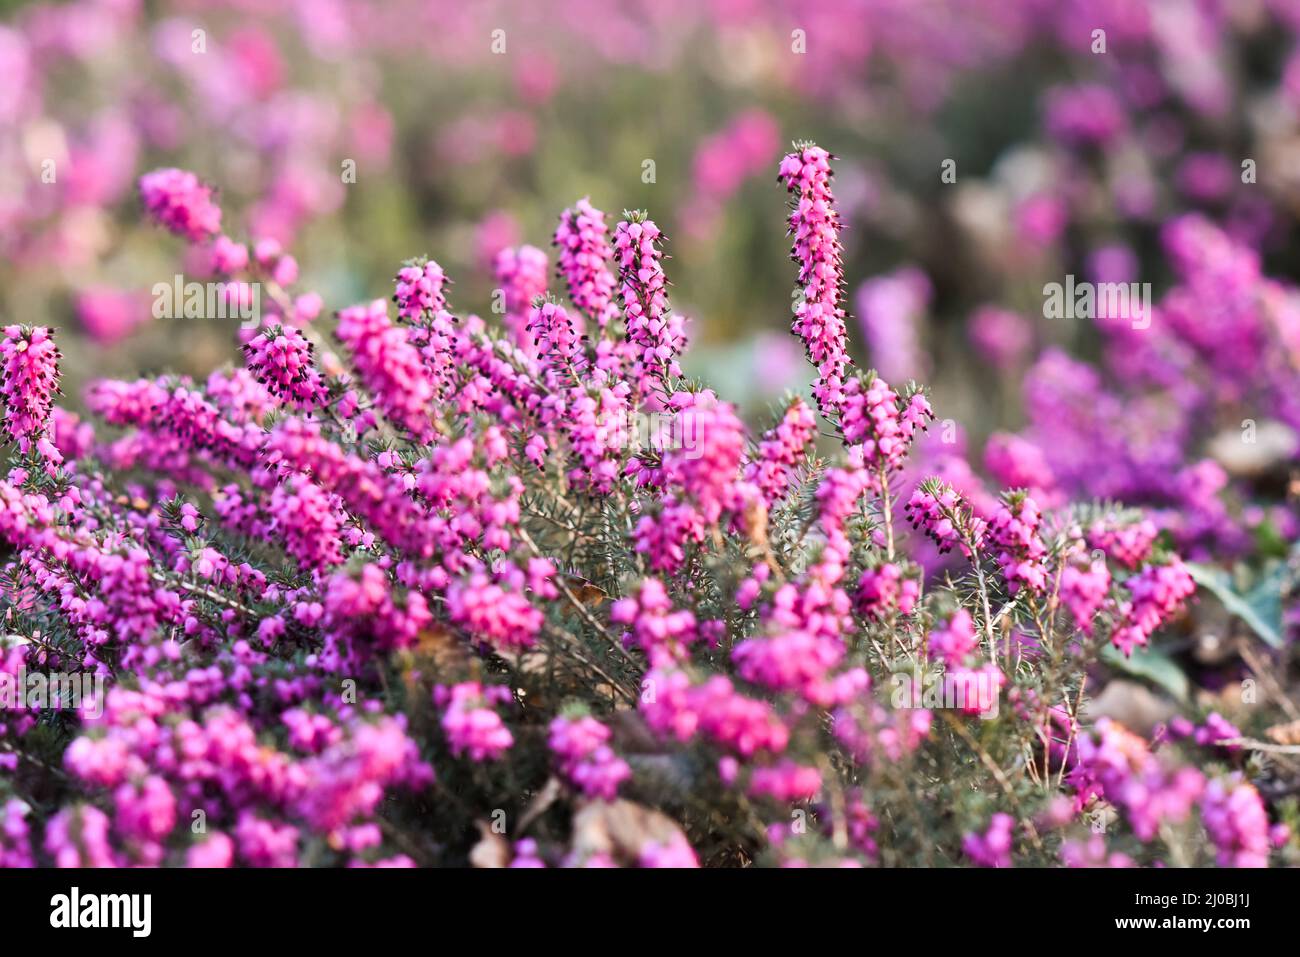 Ericaceae flower blooming in spring in the garden. Stock Photo